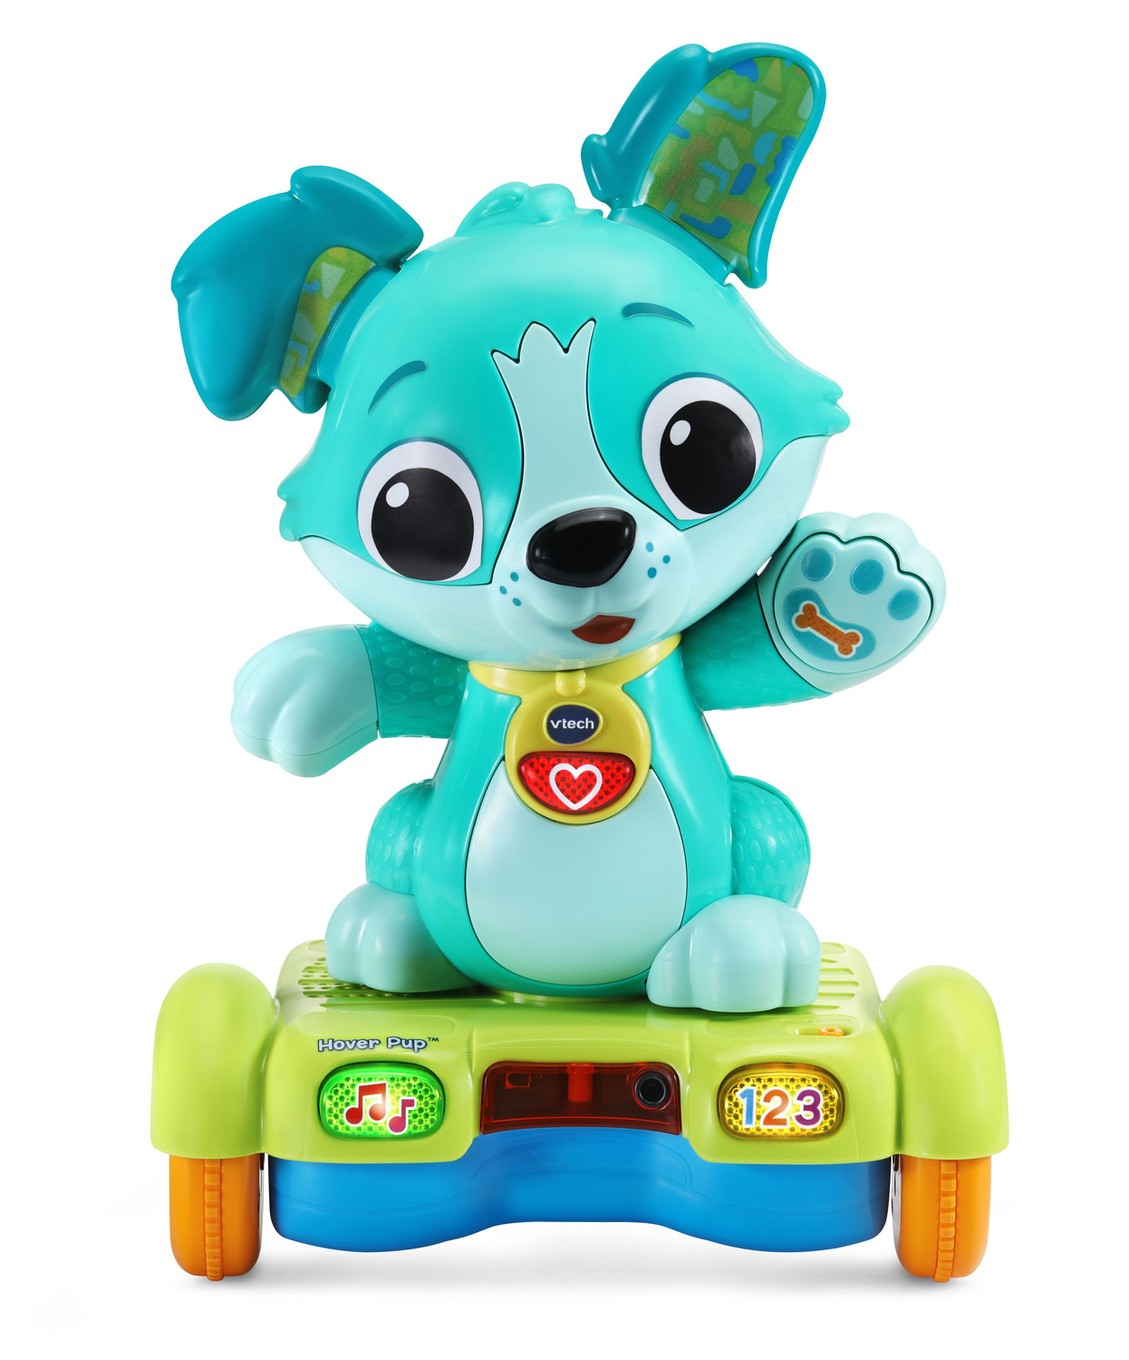 Toy For Girls Kids Children Robot Dog Puppy for 3 4 5 6 7 8 9 10 Years Olds  Age